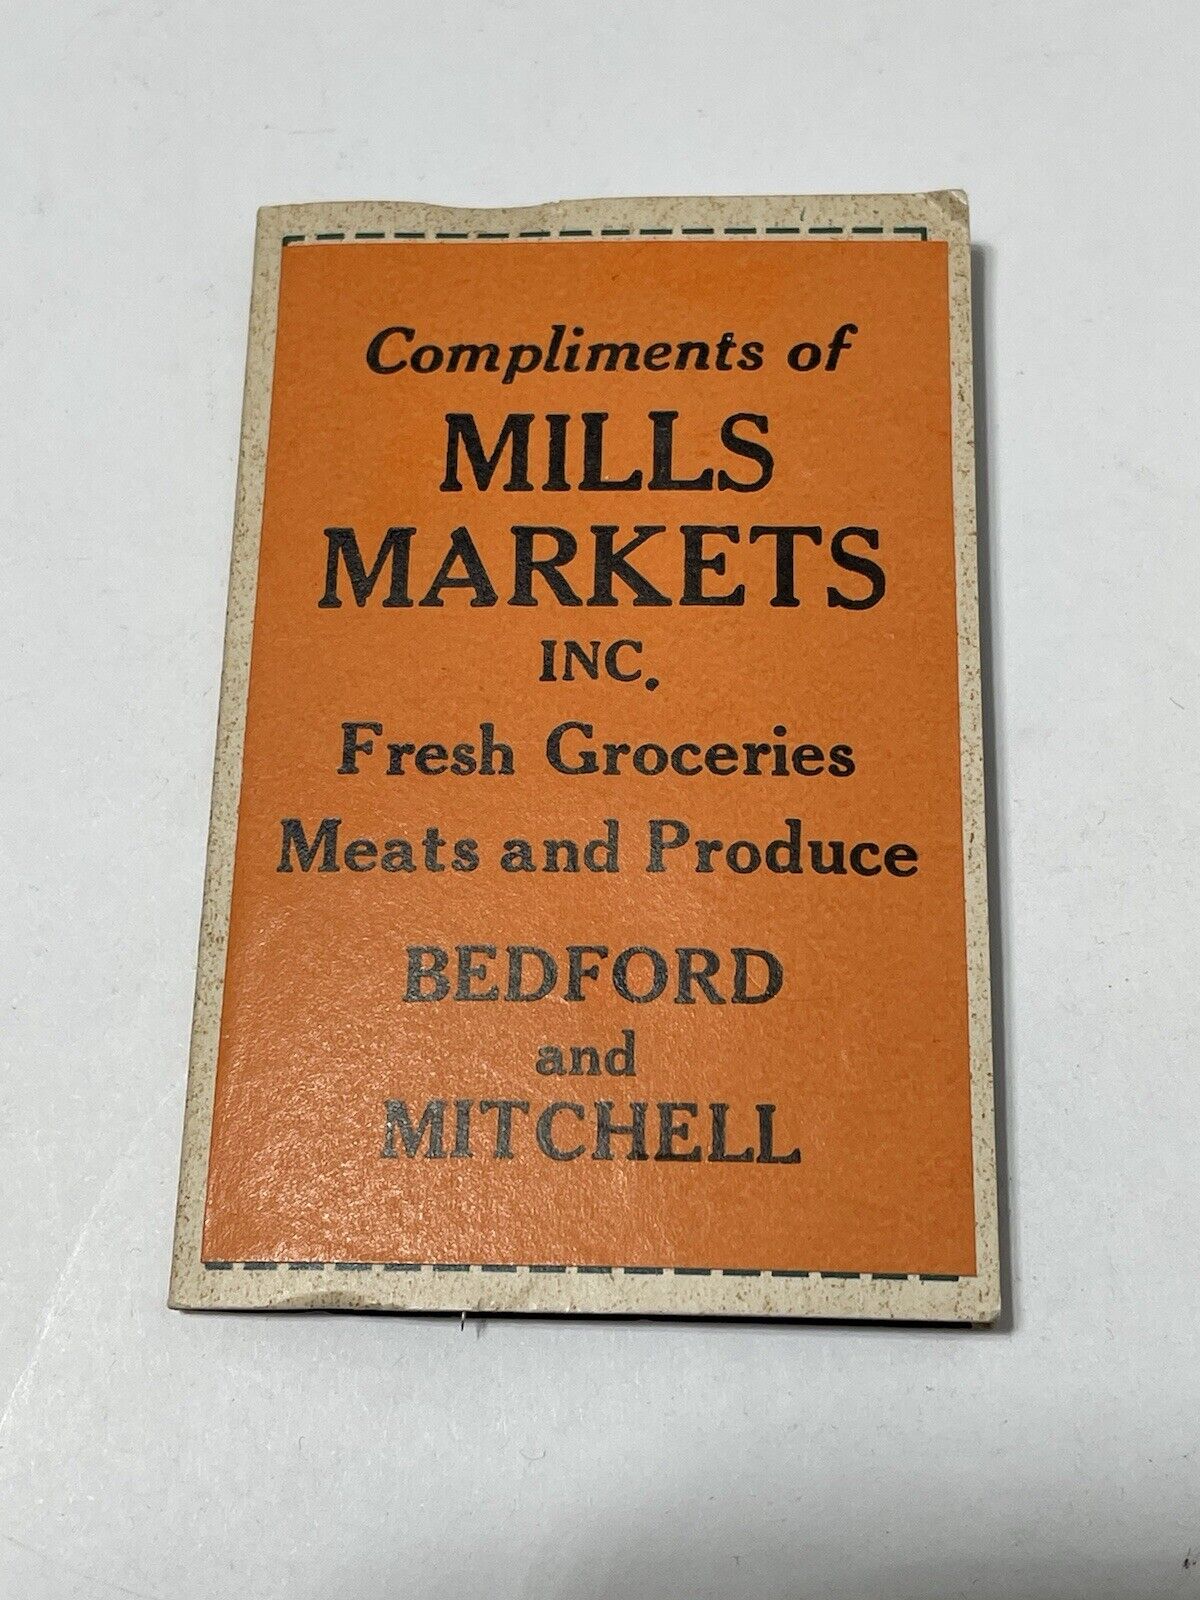 Vtg Bedford Indiana Mills Market Advertising Sewing Kit Thompsons Dairy Ad